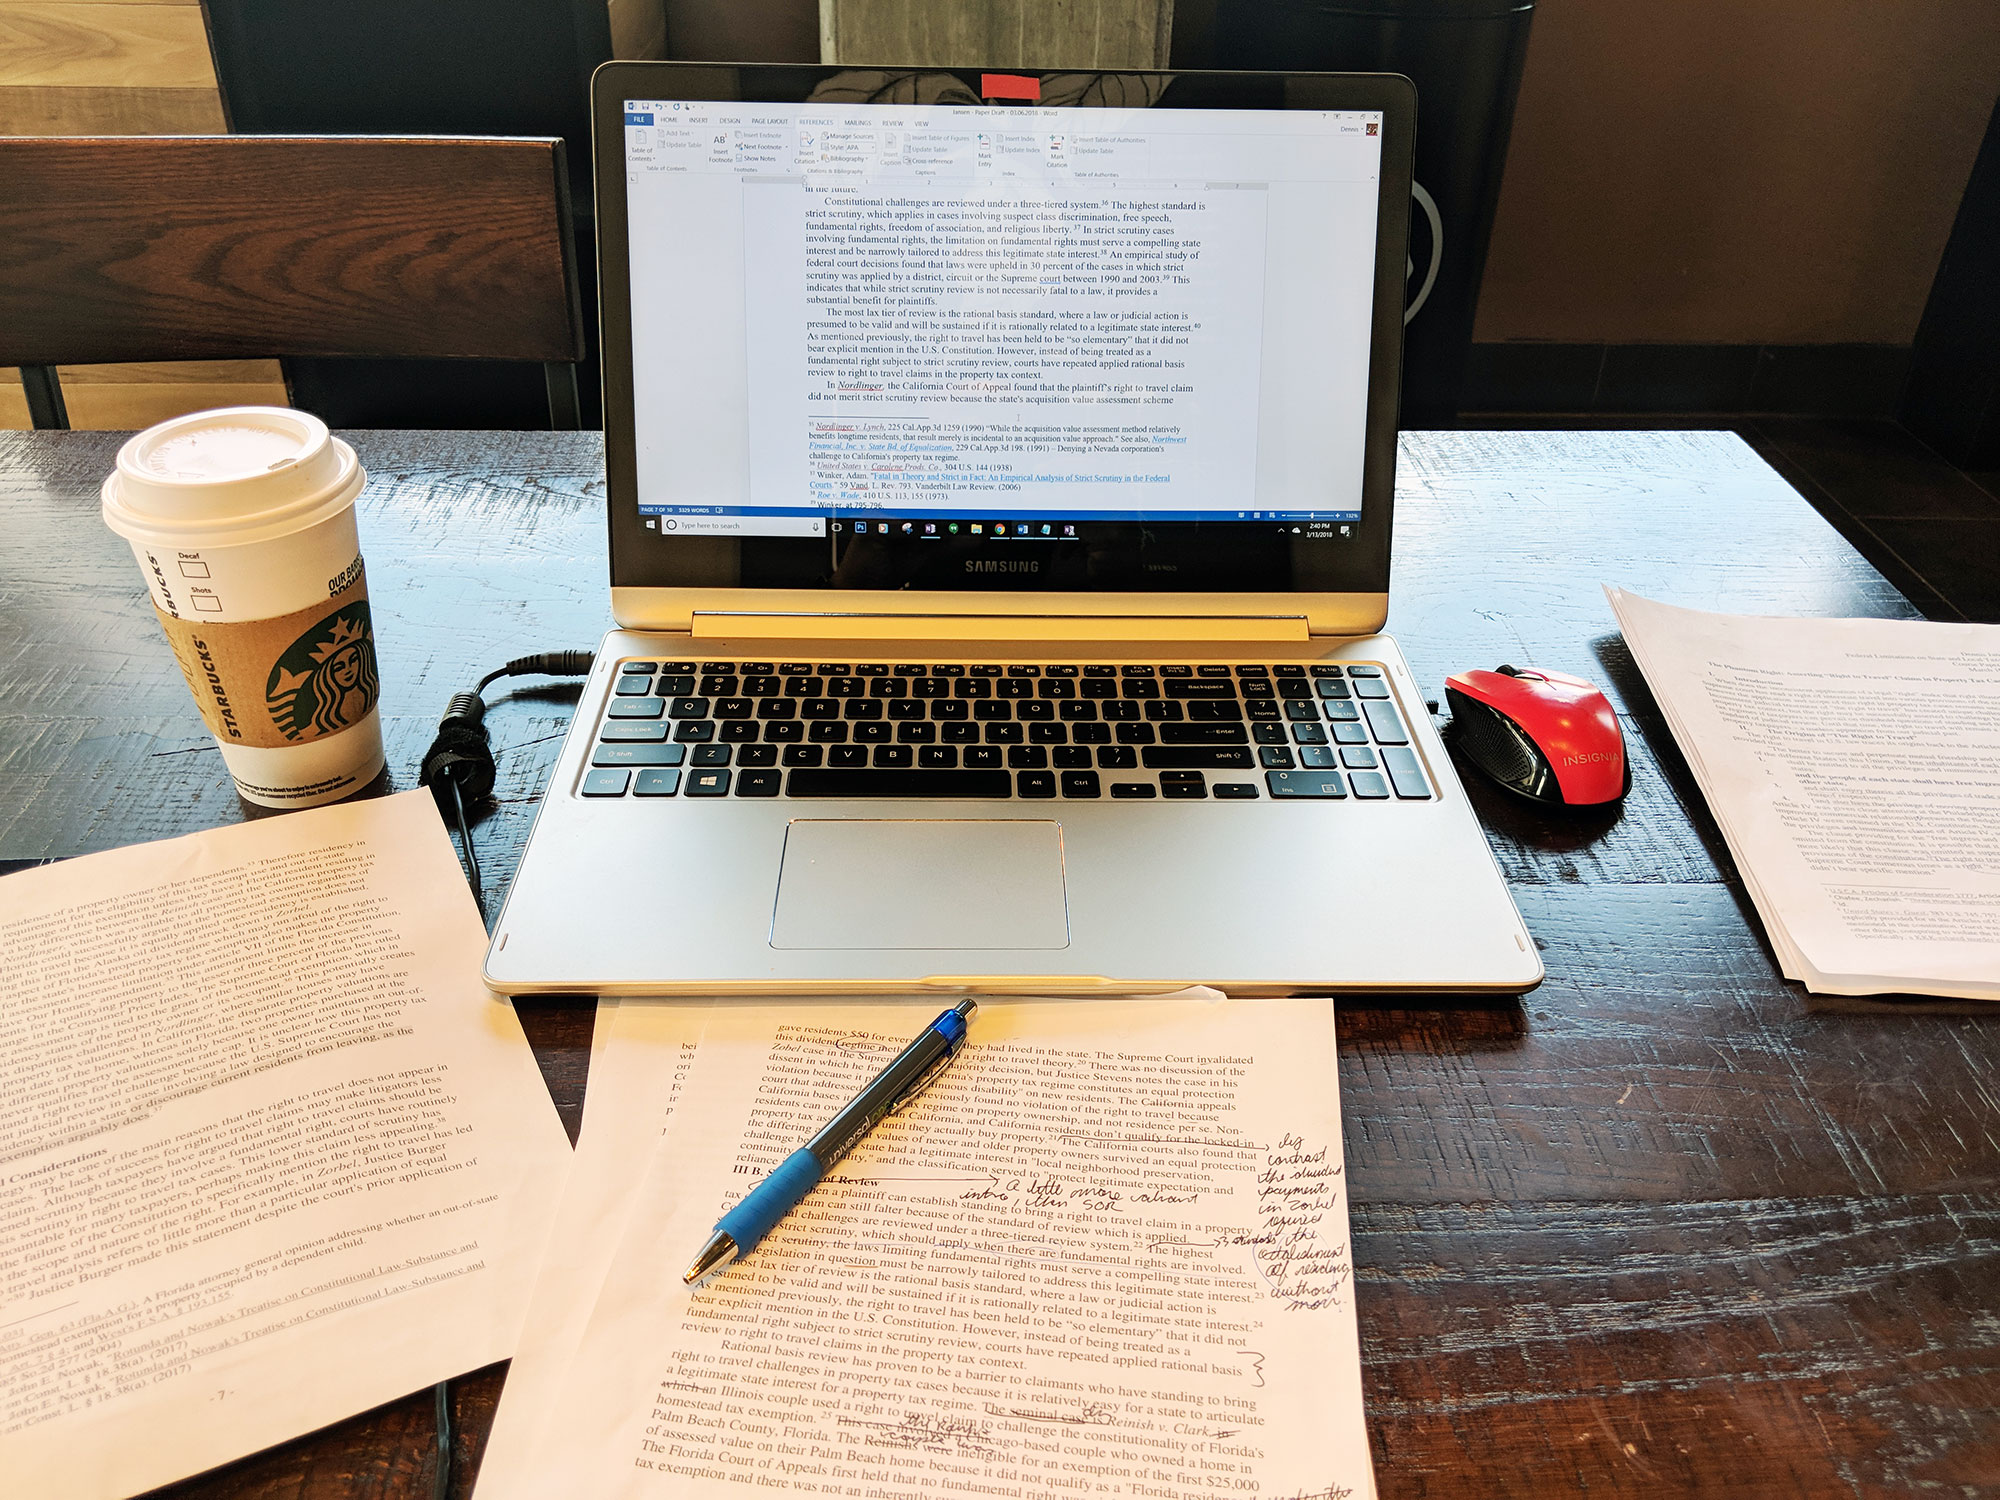 Working on a legal article at Starbucks